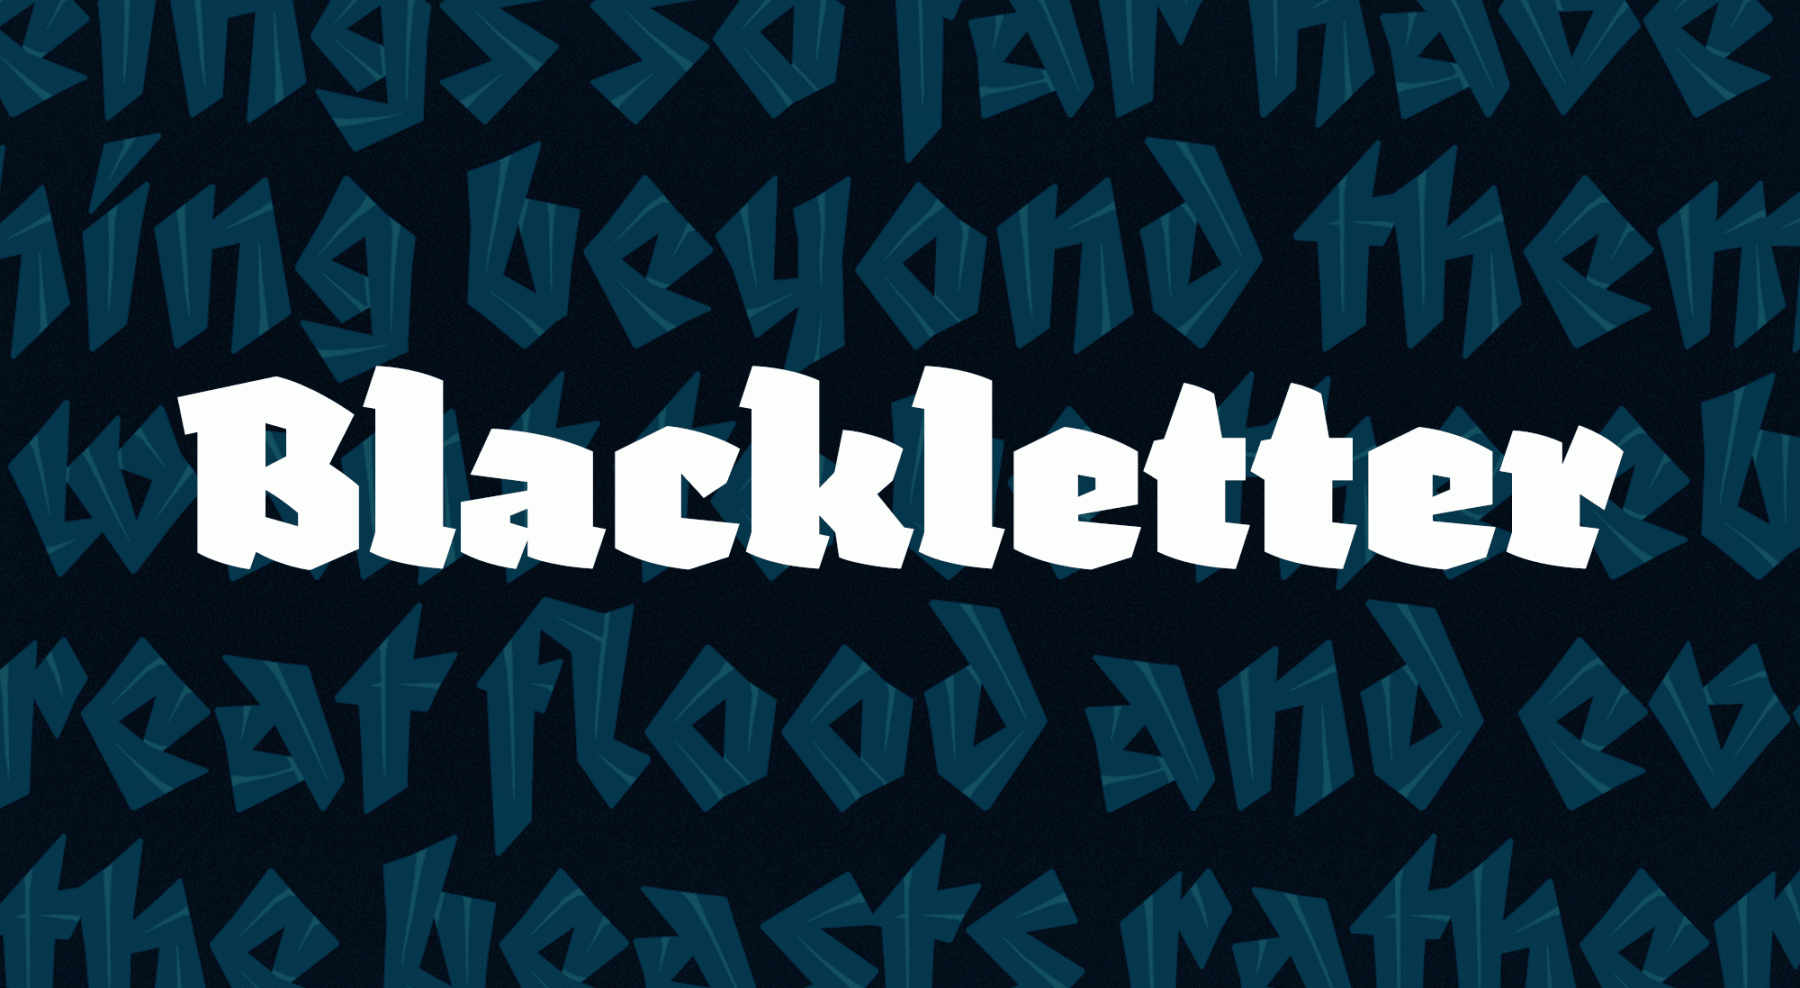 More information about "The Best Contemporary Blackletter Fonts"